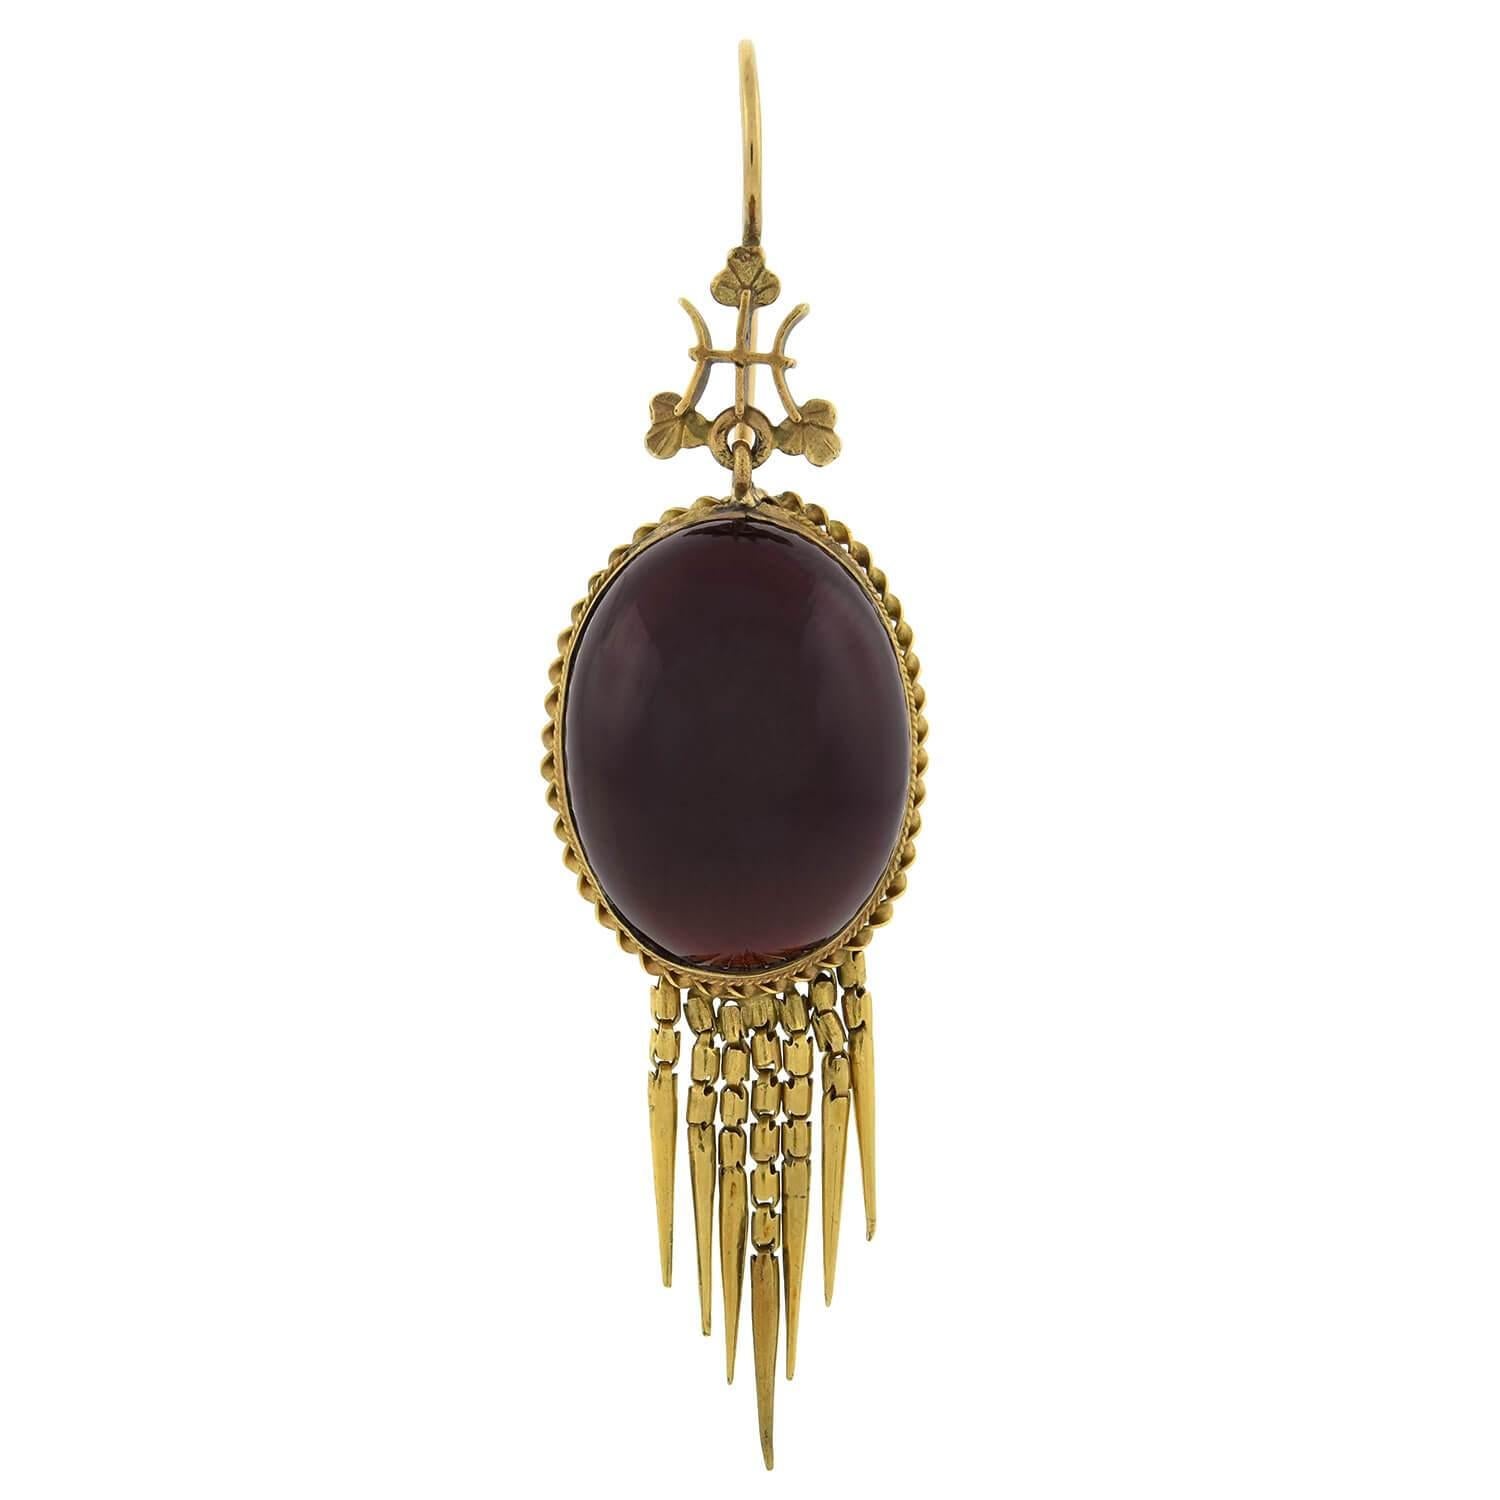 An absolutely gorgeous pair of garnet earrings from the Victorian (ca1880s) era! Crafted in rich 15kt yellow gold, each of these dramatic earrings holds a large open-backed cabochon garnet stone at the center. The garnet rests in a gold bezel which